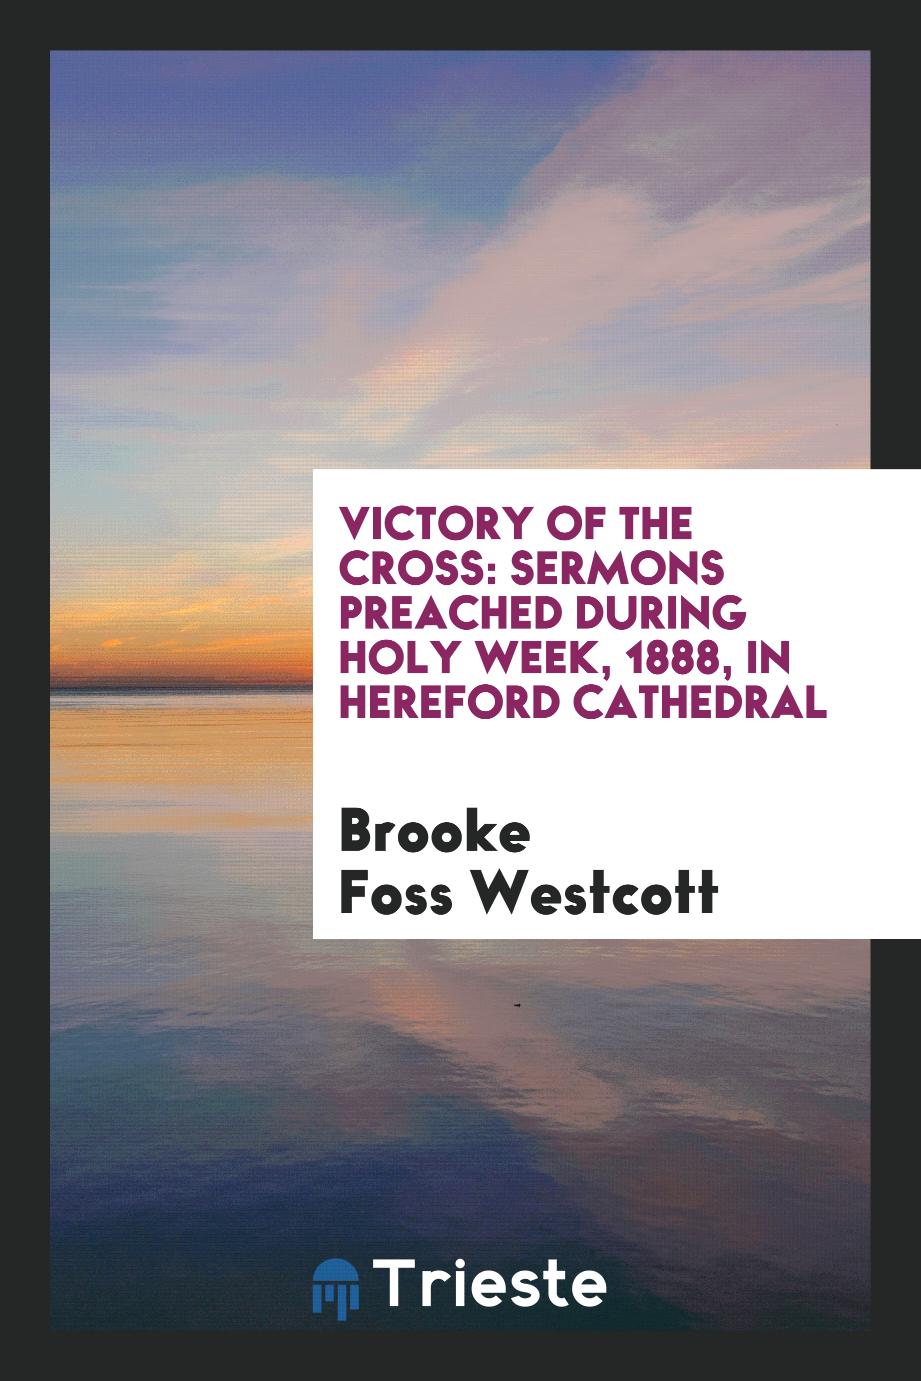 Victory of the Cross: Sermons Preached during Holy Week, 1888, in Hereford Cathedral